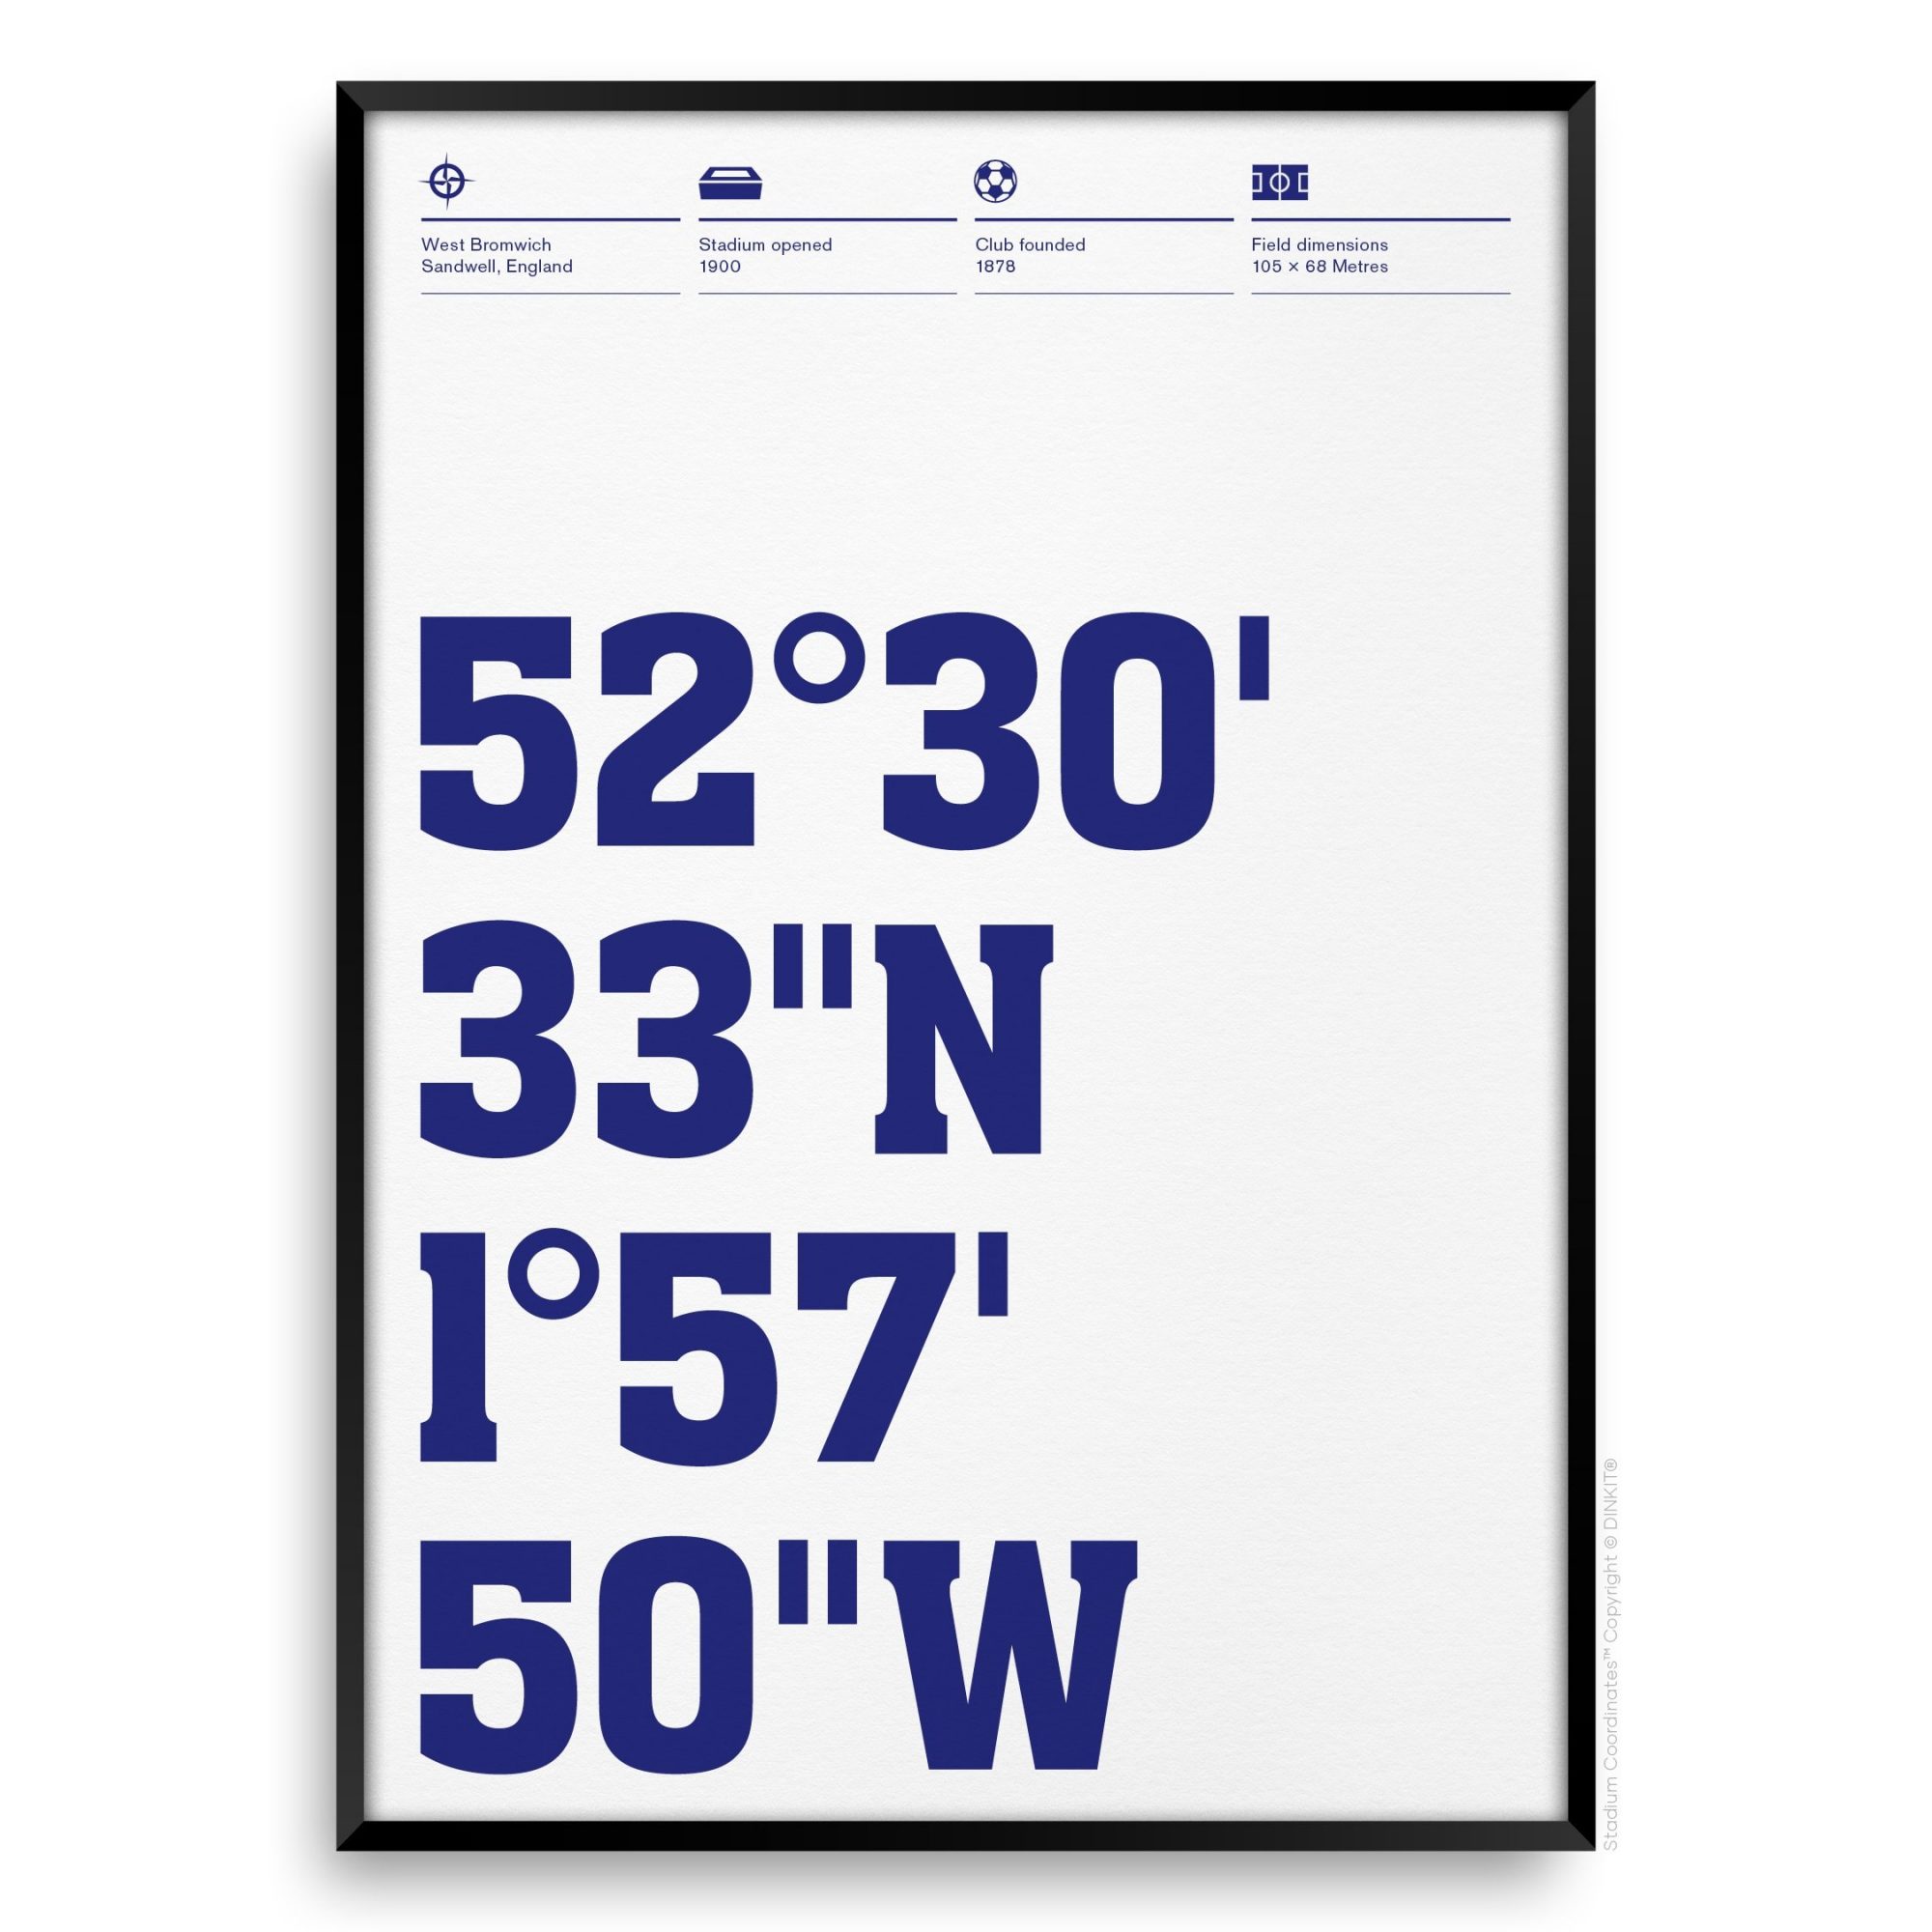 West Bromwich Albion Gifts, Football Posters, Gift Ideas